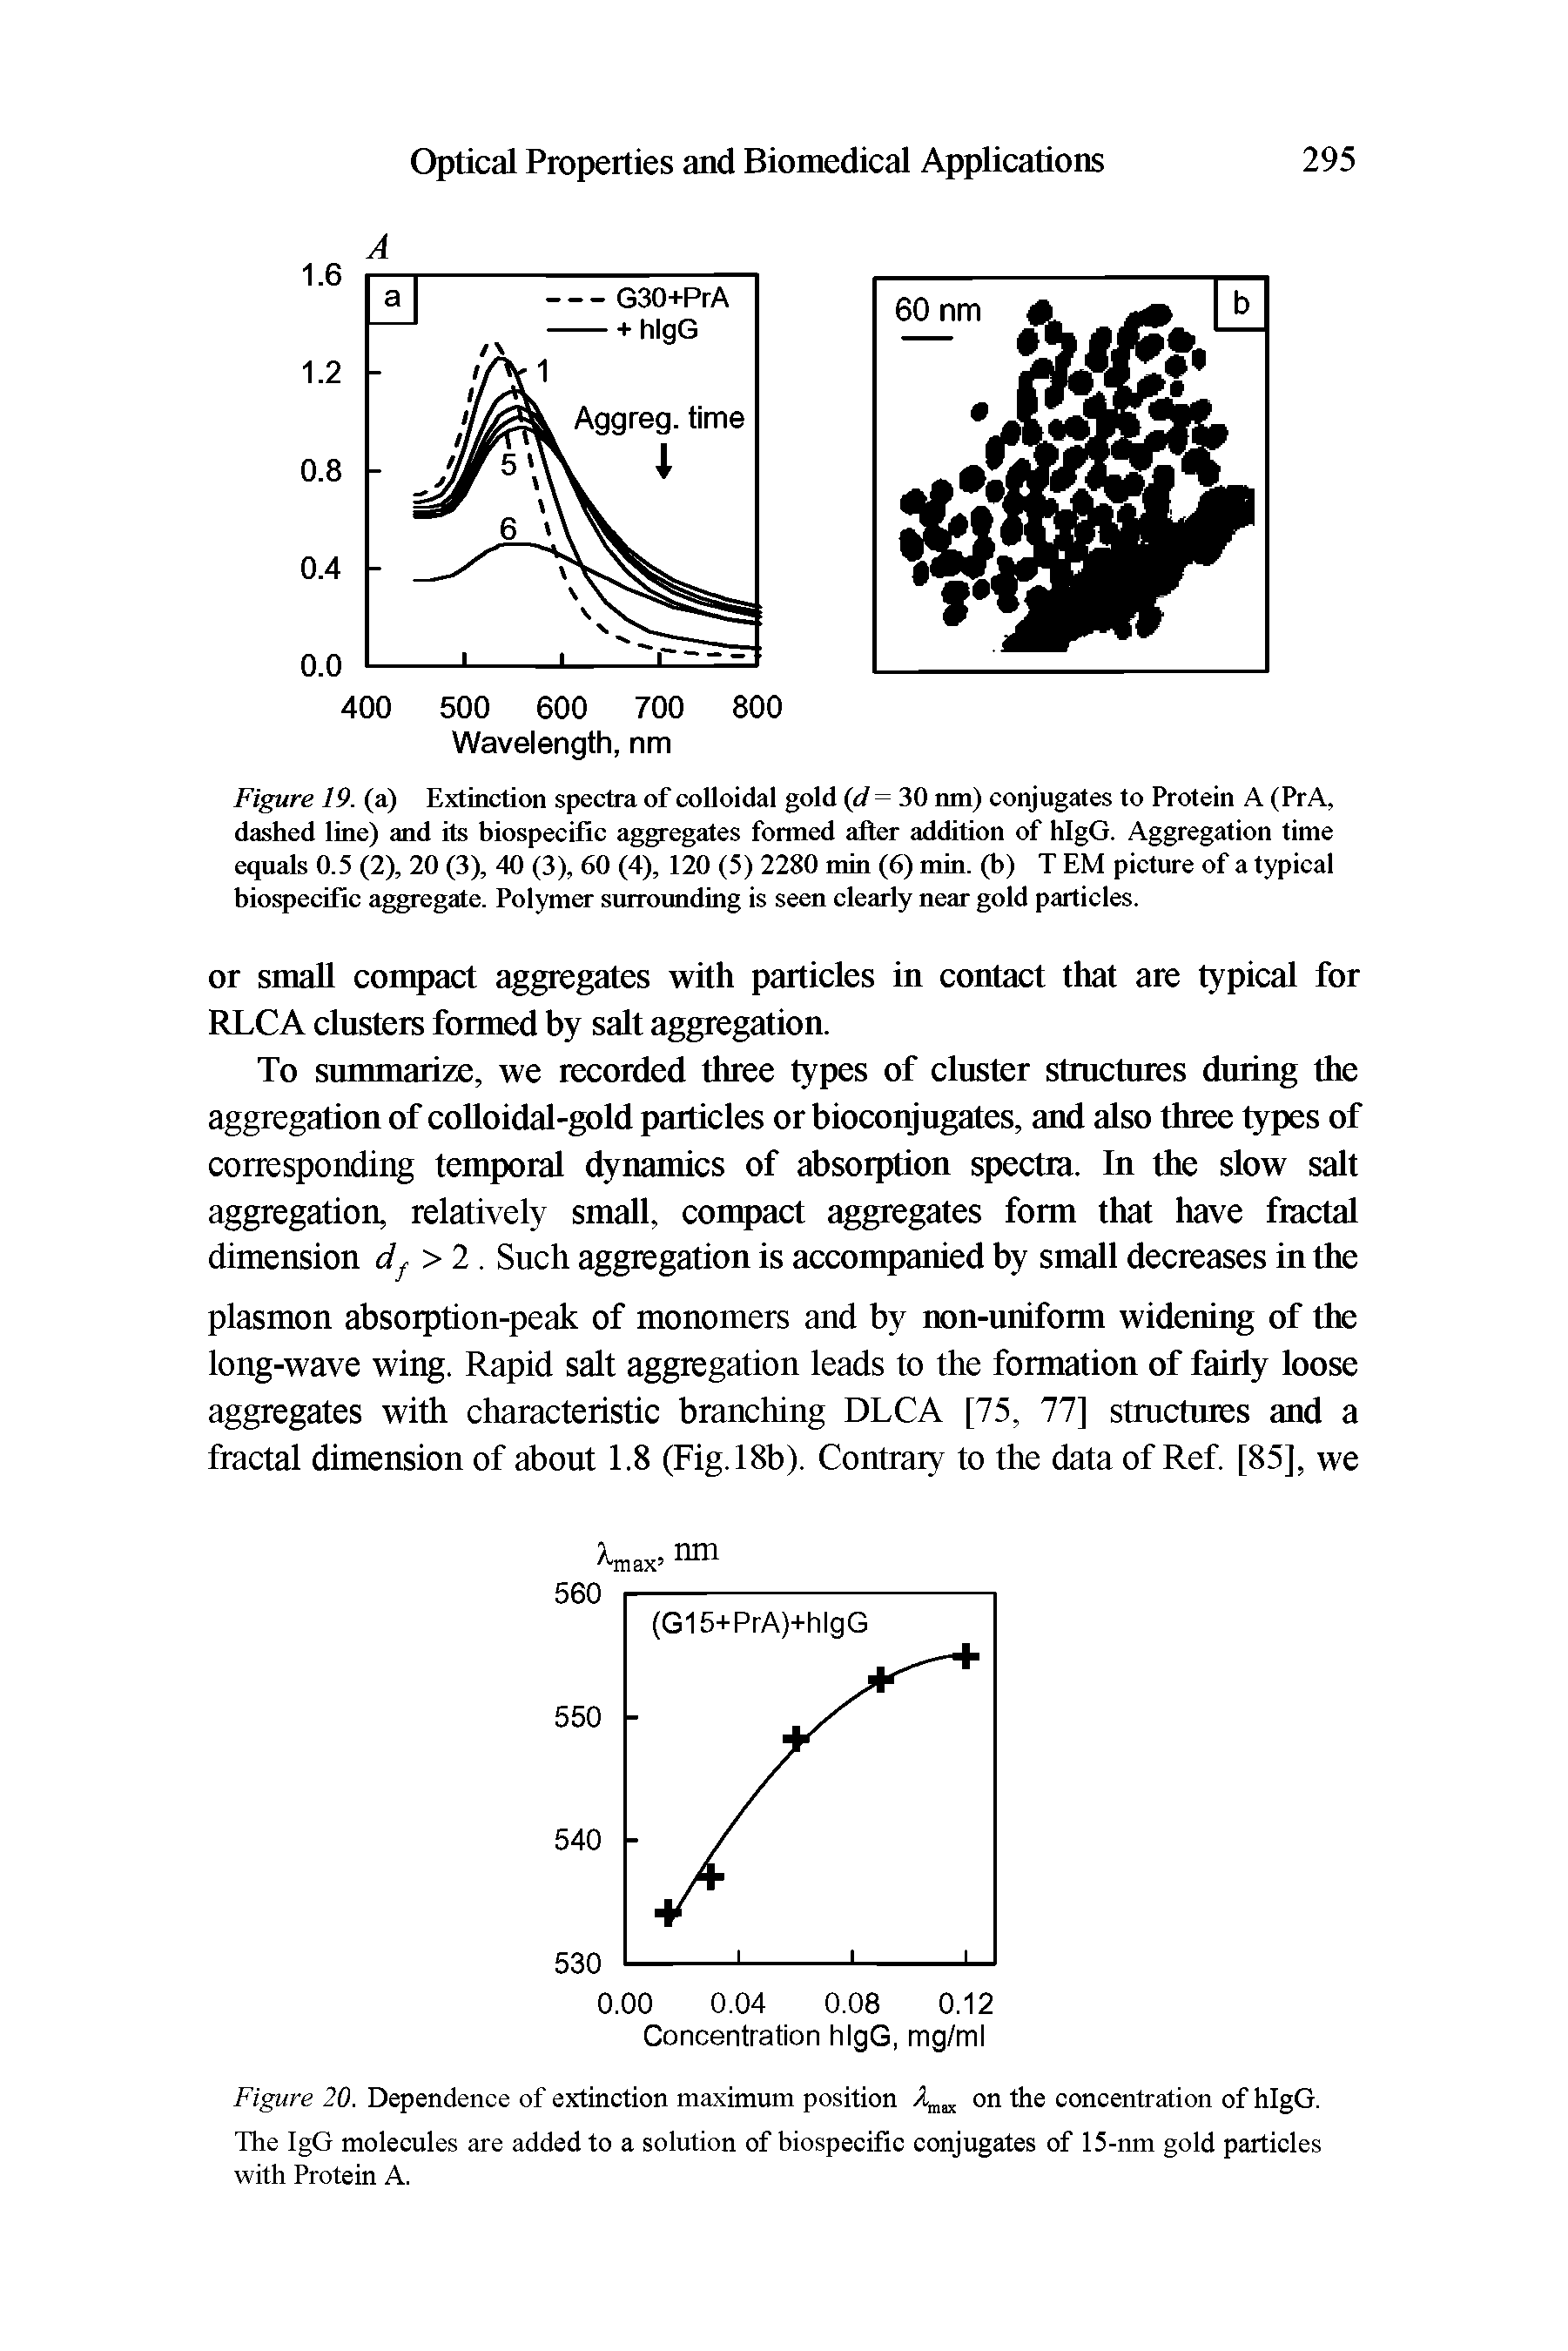 Figure 20. Dependence of extinction maximum position 2, on the concentration of hlgG.